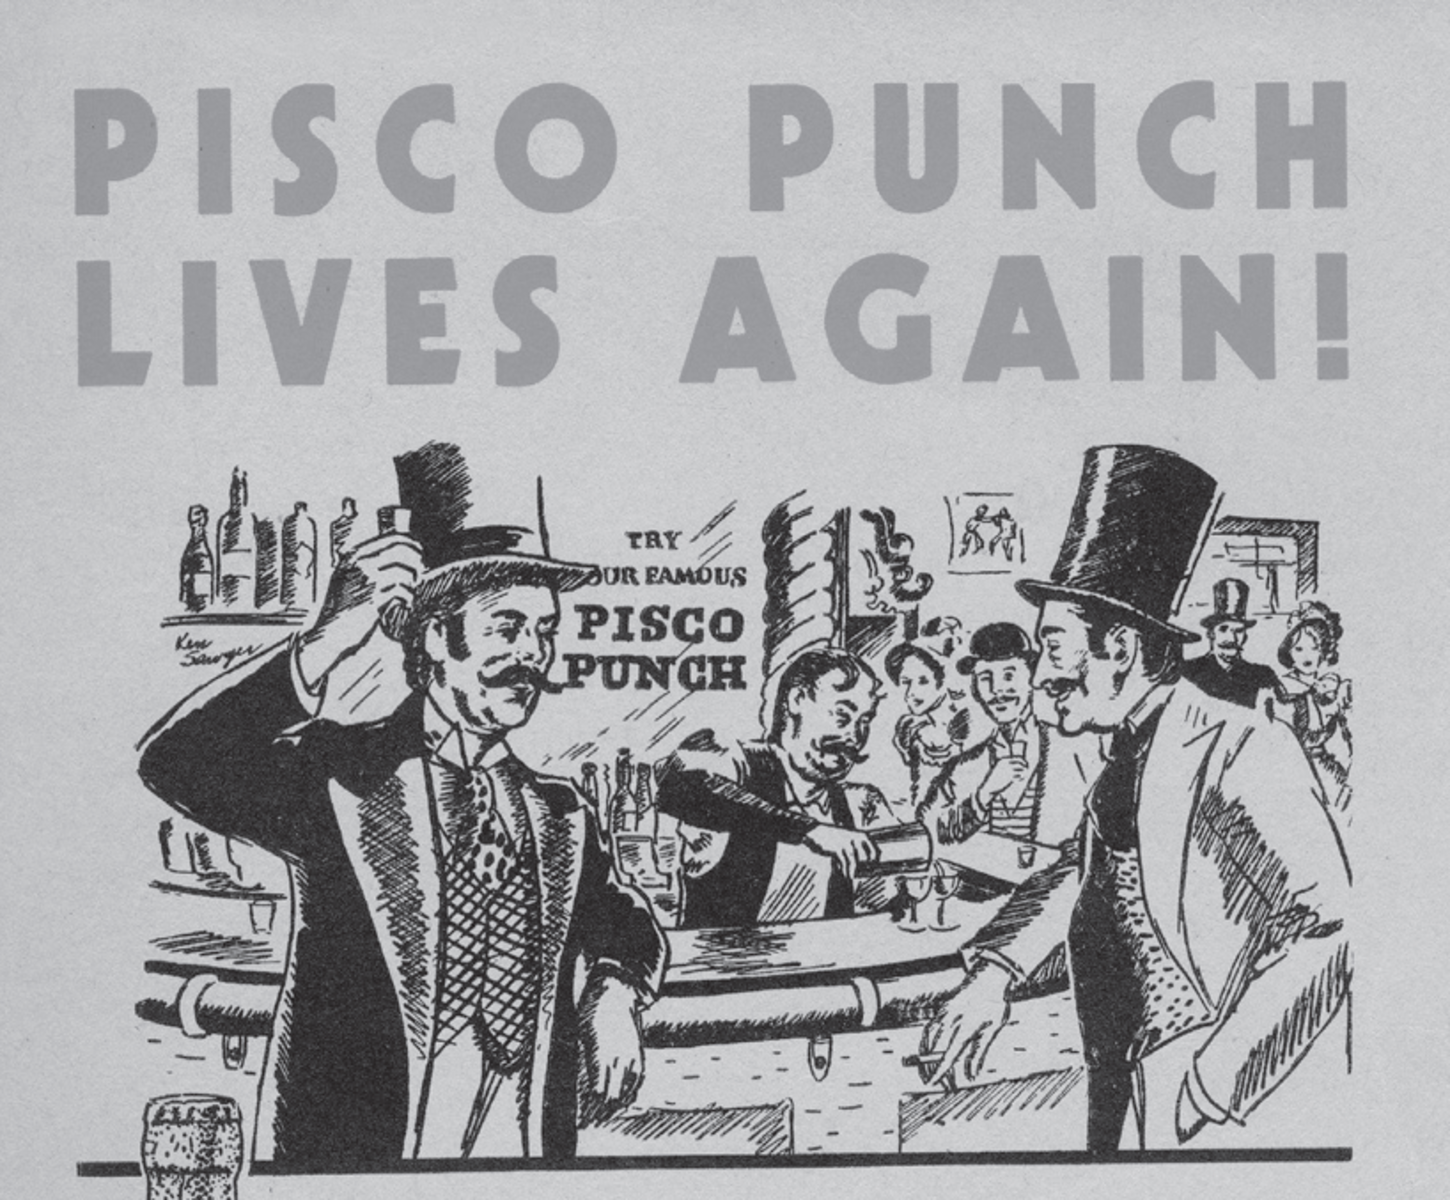 Pisco Punch Lives Again!